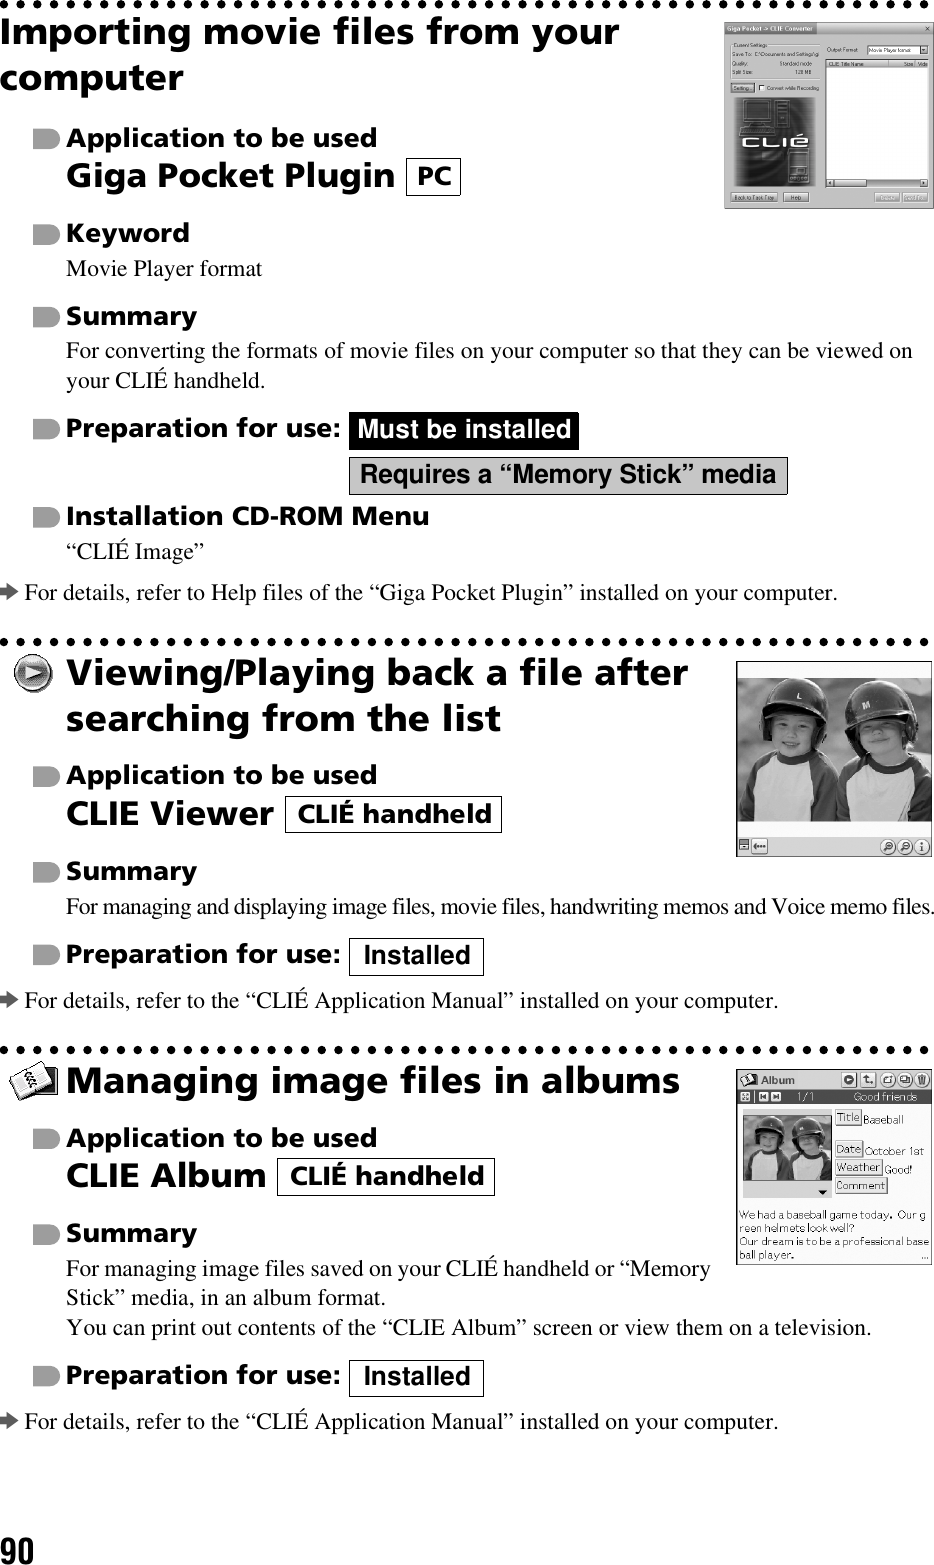 90Importing movie files from your computerApplication to be usedGiga Pocket Plugin KeywordMovie Player formatSummaryFor converting the formats of movie files on your computer so that they can be viewed on your CLIÉ handheld.Preparation for use:   Installation CD-ROM Menu“CLIÉ Image”bFor details, refer to Help files of the “Giga Pocket Plugin” installed on your computer.Viewing/Playing back a file after searching from the listApplication to be usedCLIE Viewer SummaryFor managing and displaying image files, movie files, handwriting memos and Voice memo files.Preparation for use: bFor details, refer to the “CLIÉ Application Manual” installed on your computer.Managing image files in albumsApplication to be usedCLIE Album SummaryFor managing image files saved on your CLIÉ handheld or “Memory Stick” media, in an album format.You can print out contents of the “CLIE Album” screen or view them on a television.Preparation for use: bFor details, refer to the “CLIÉ Application Manual” installed on your computer.PCMust be installedRequires a “Memory Stick” mediaCLIÉ handheldInstalledCLIÉ handheldInstalled